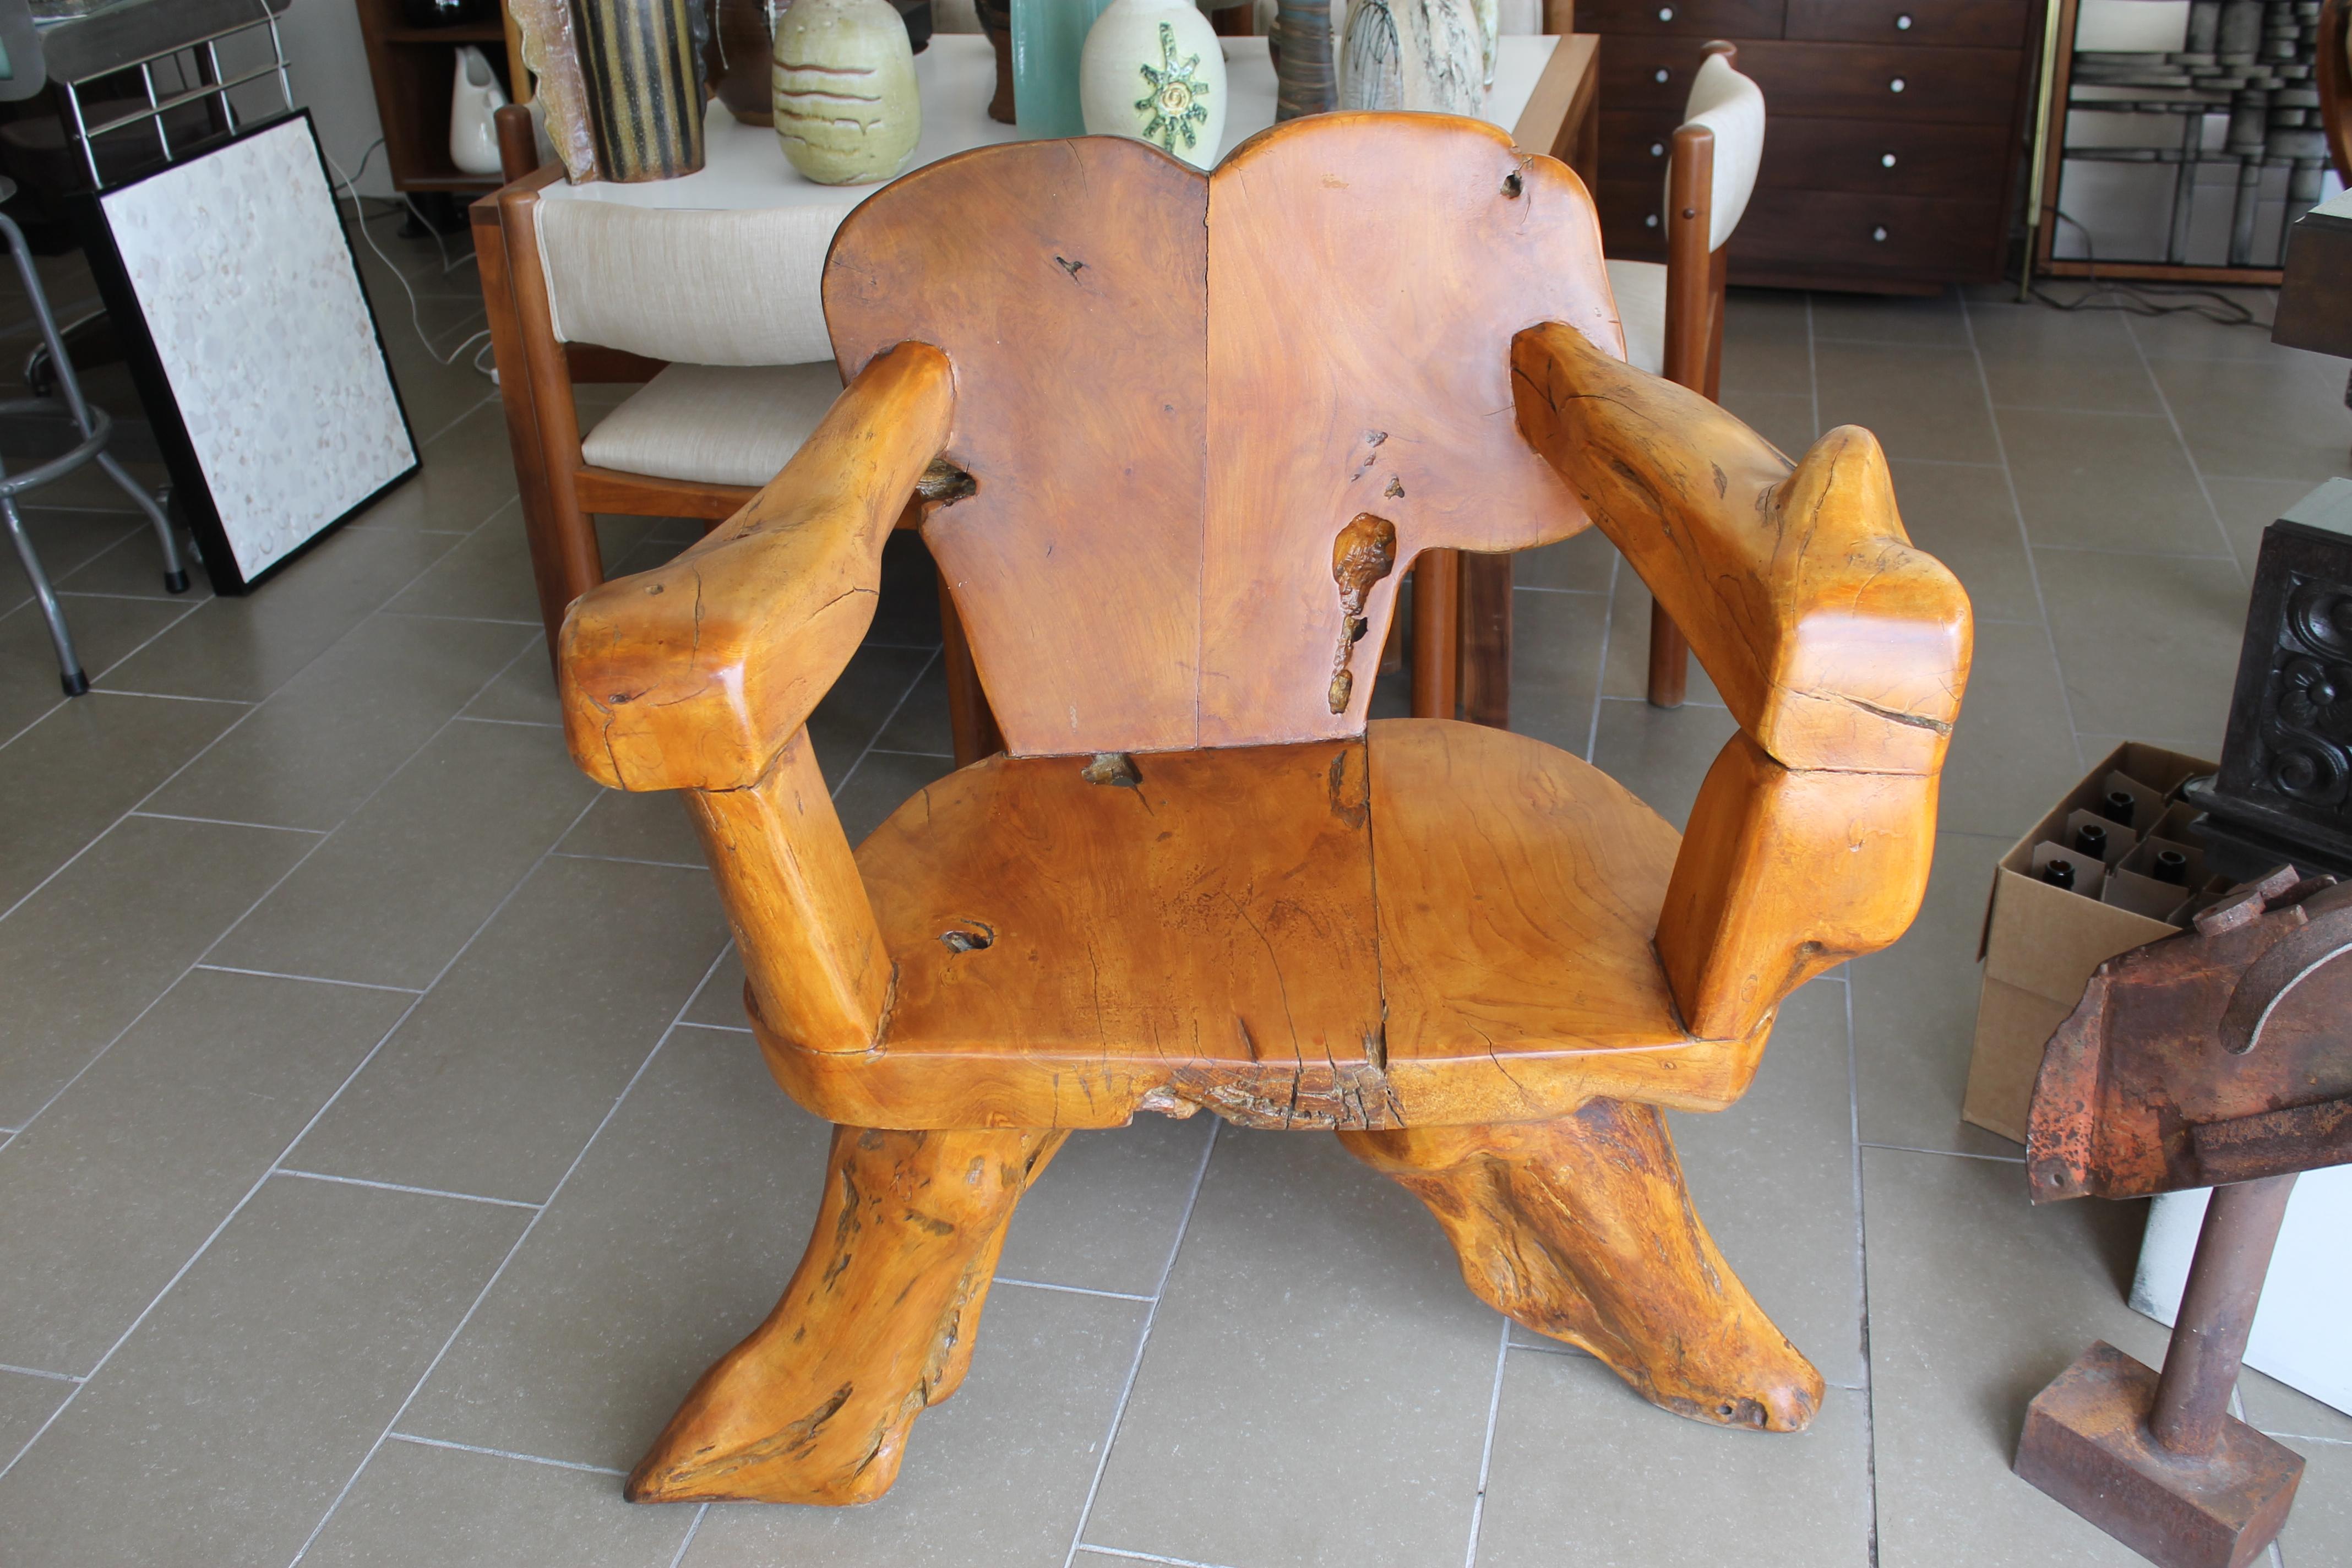 Custom teak tree root hand crafted club chair. This chair is more like a throne. Chair measures 37